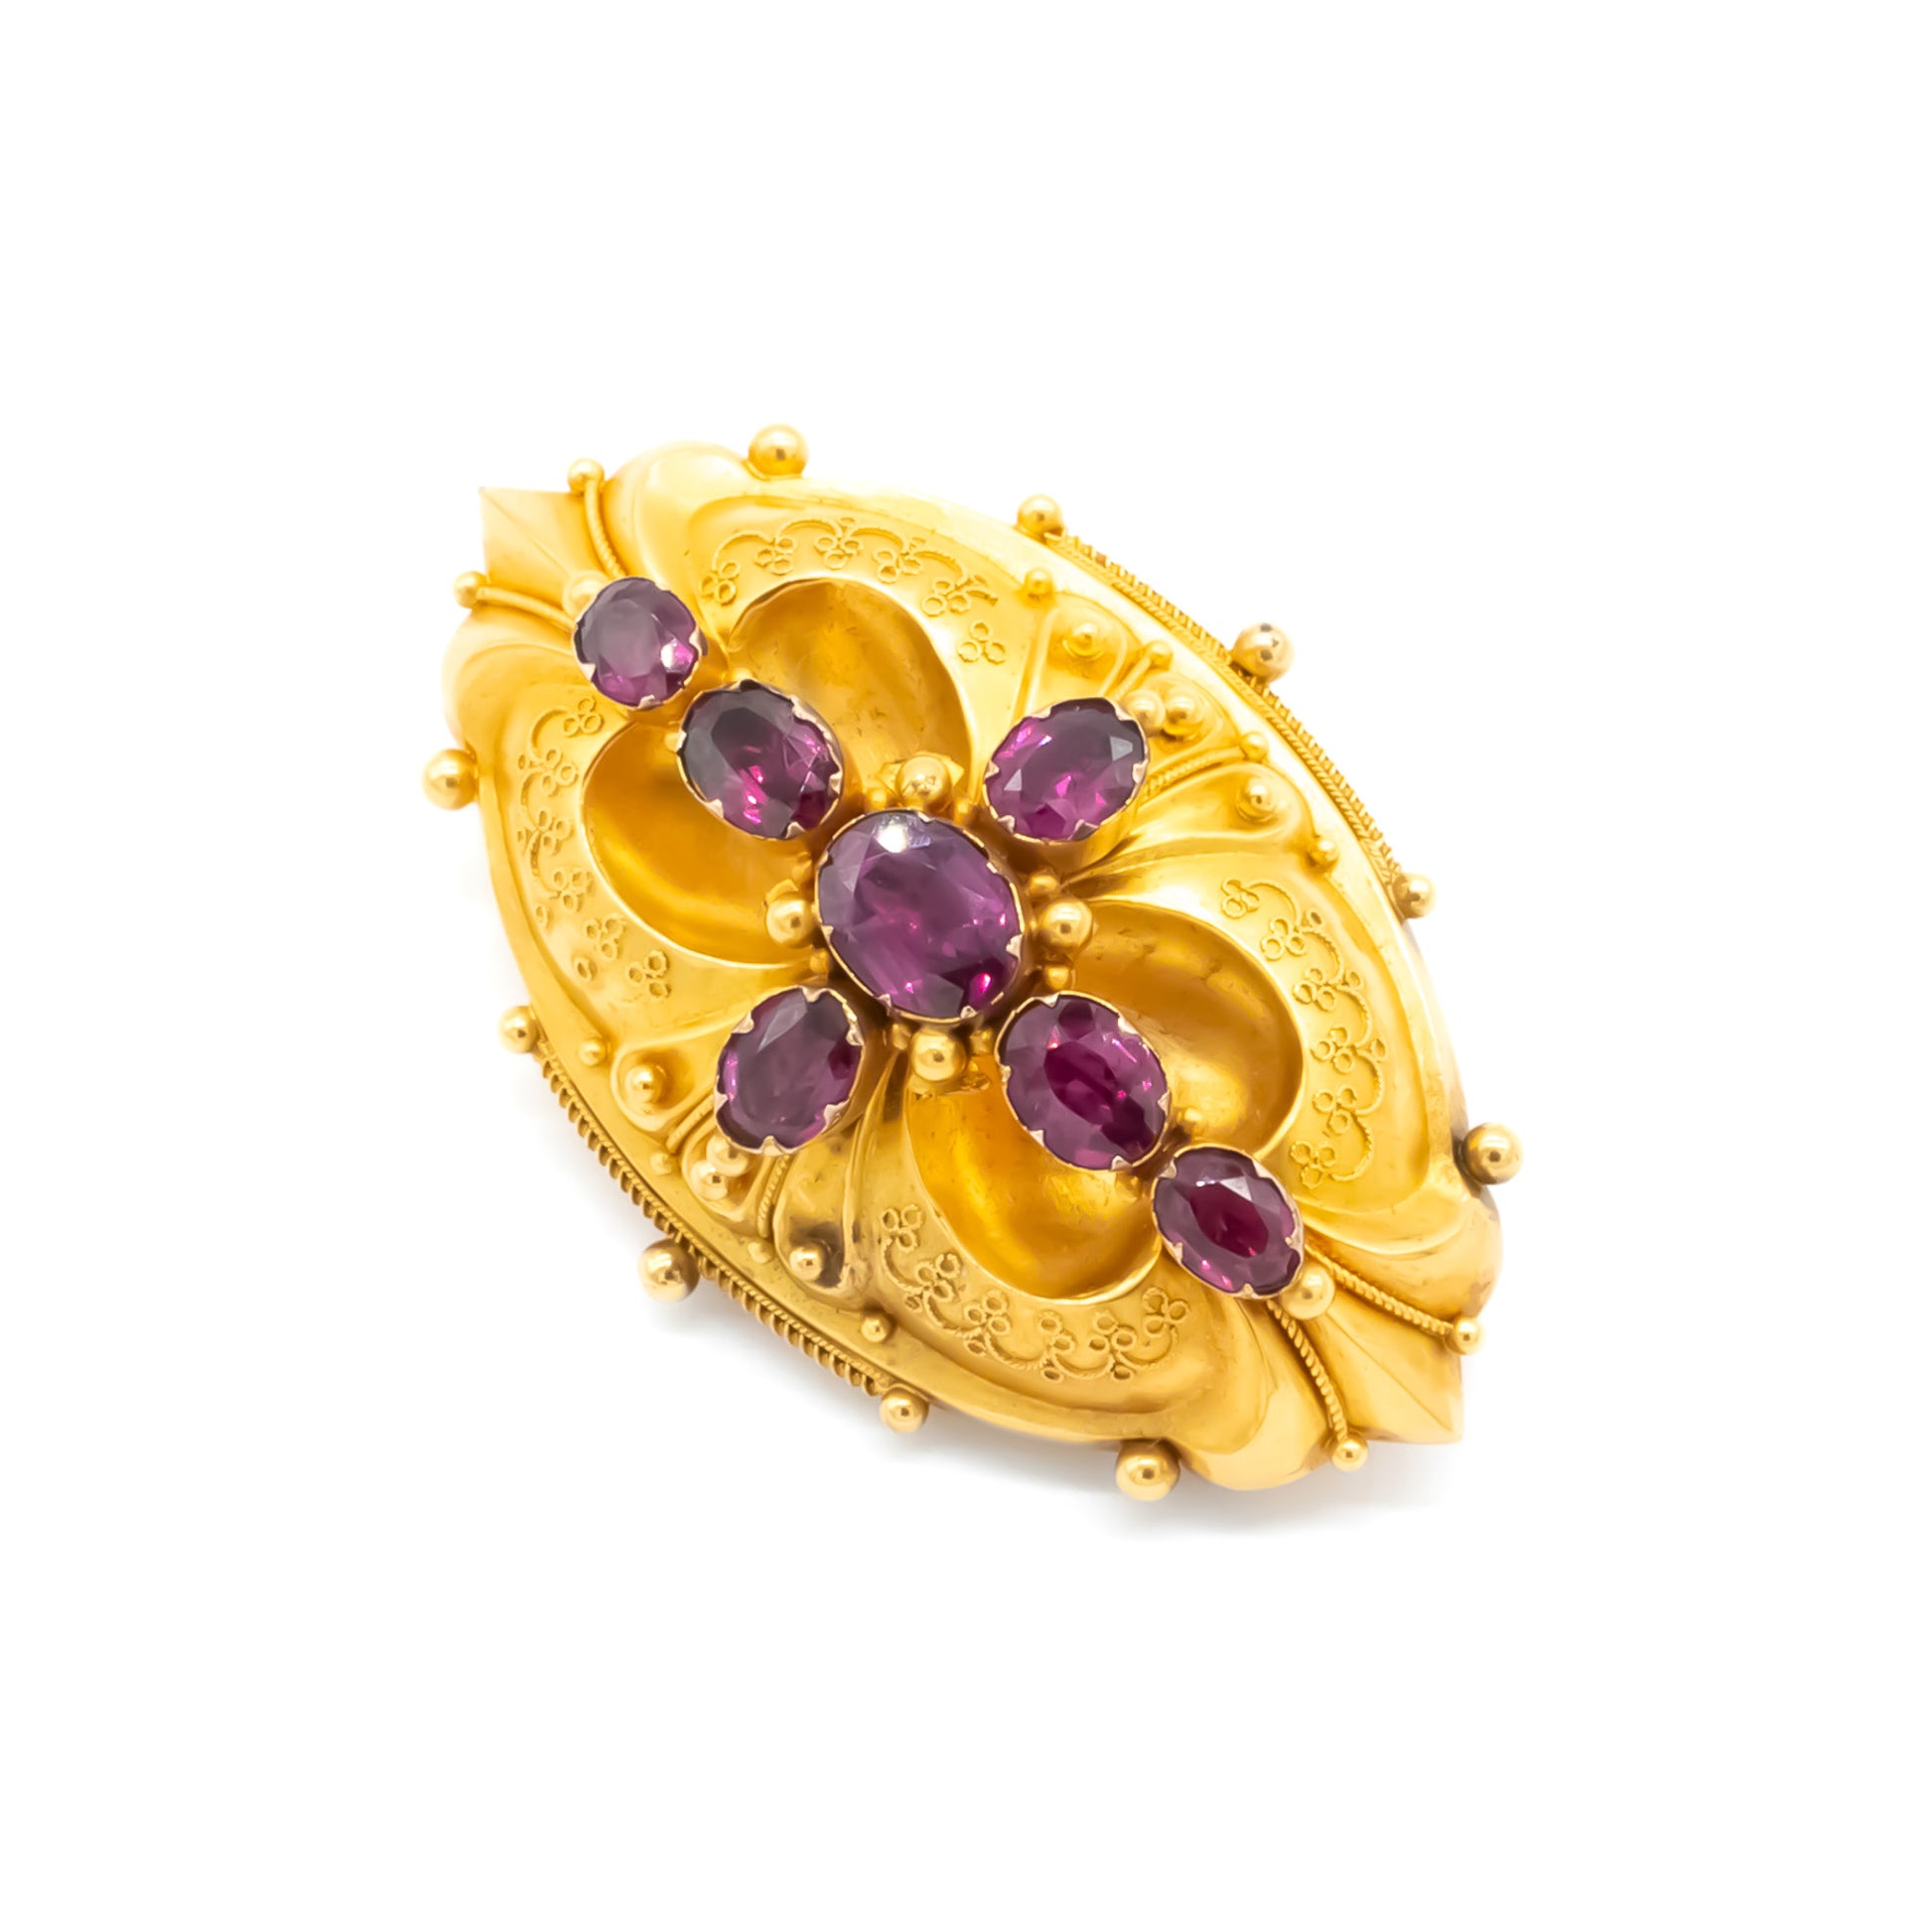 Magnificent Victorian 18ct yellow gold Etruscan brooch set with seven beautifully faceted purplish-red almandine garnets.